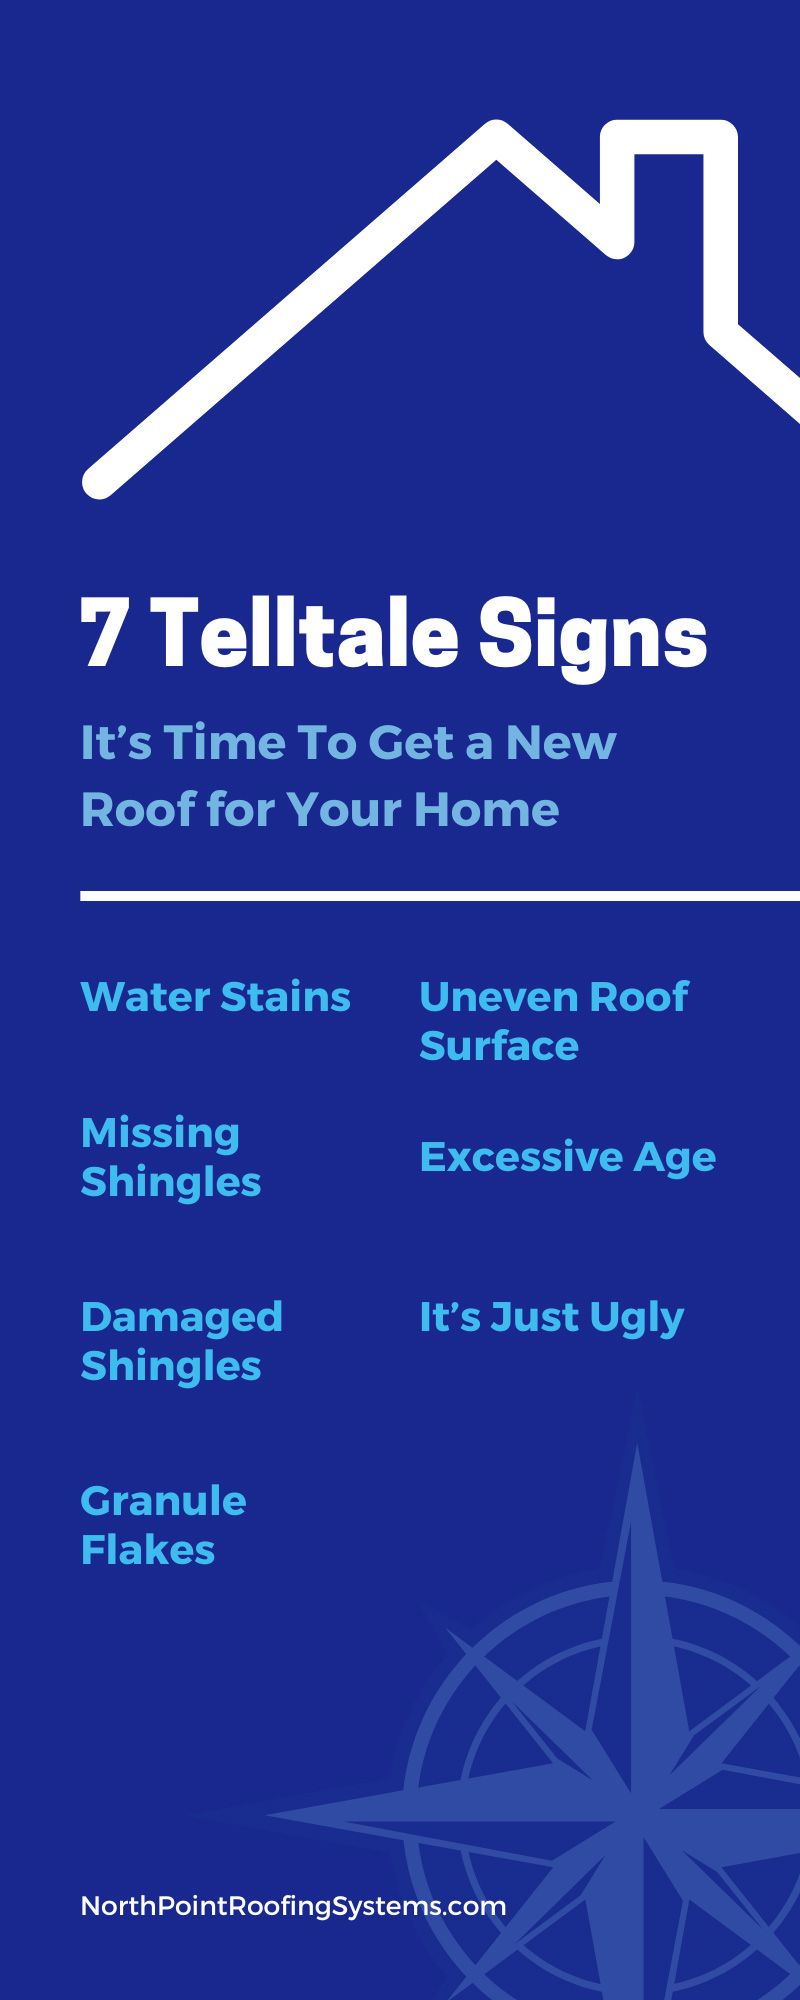 7 Telltale Signs It's Time To Get a New Roof for Your Home